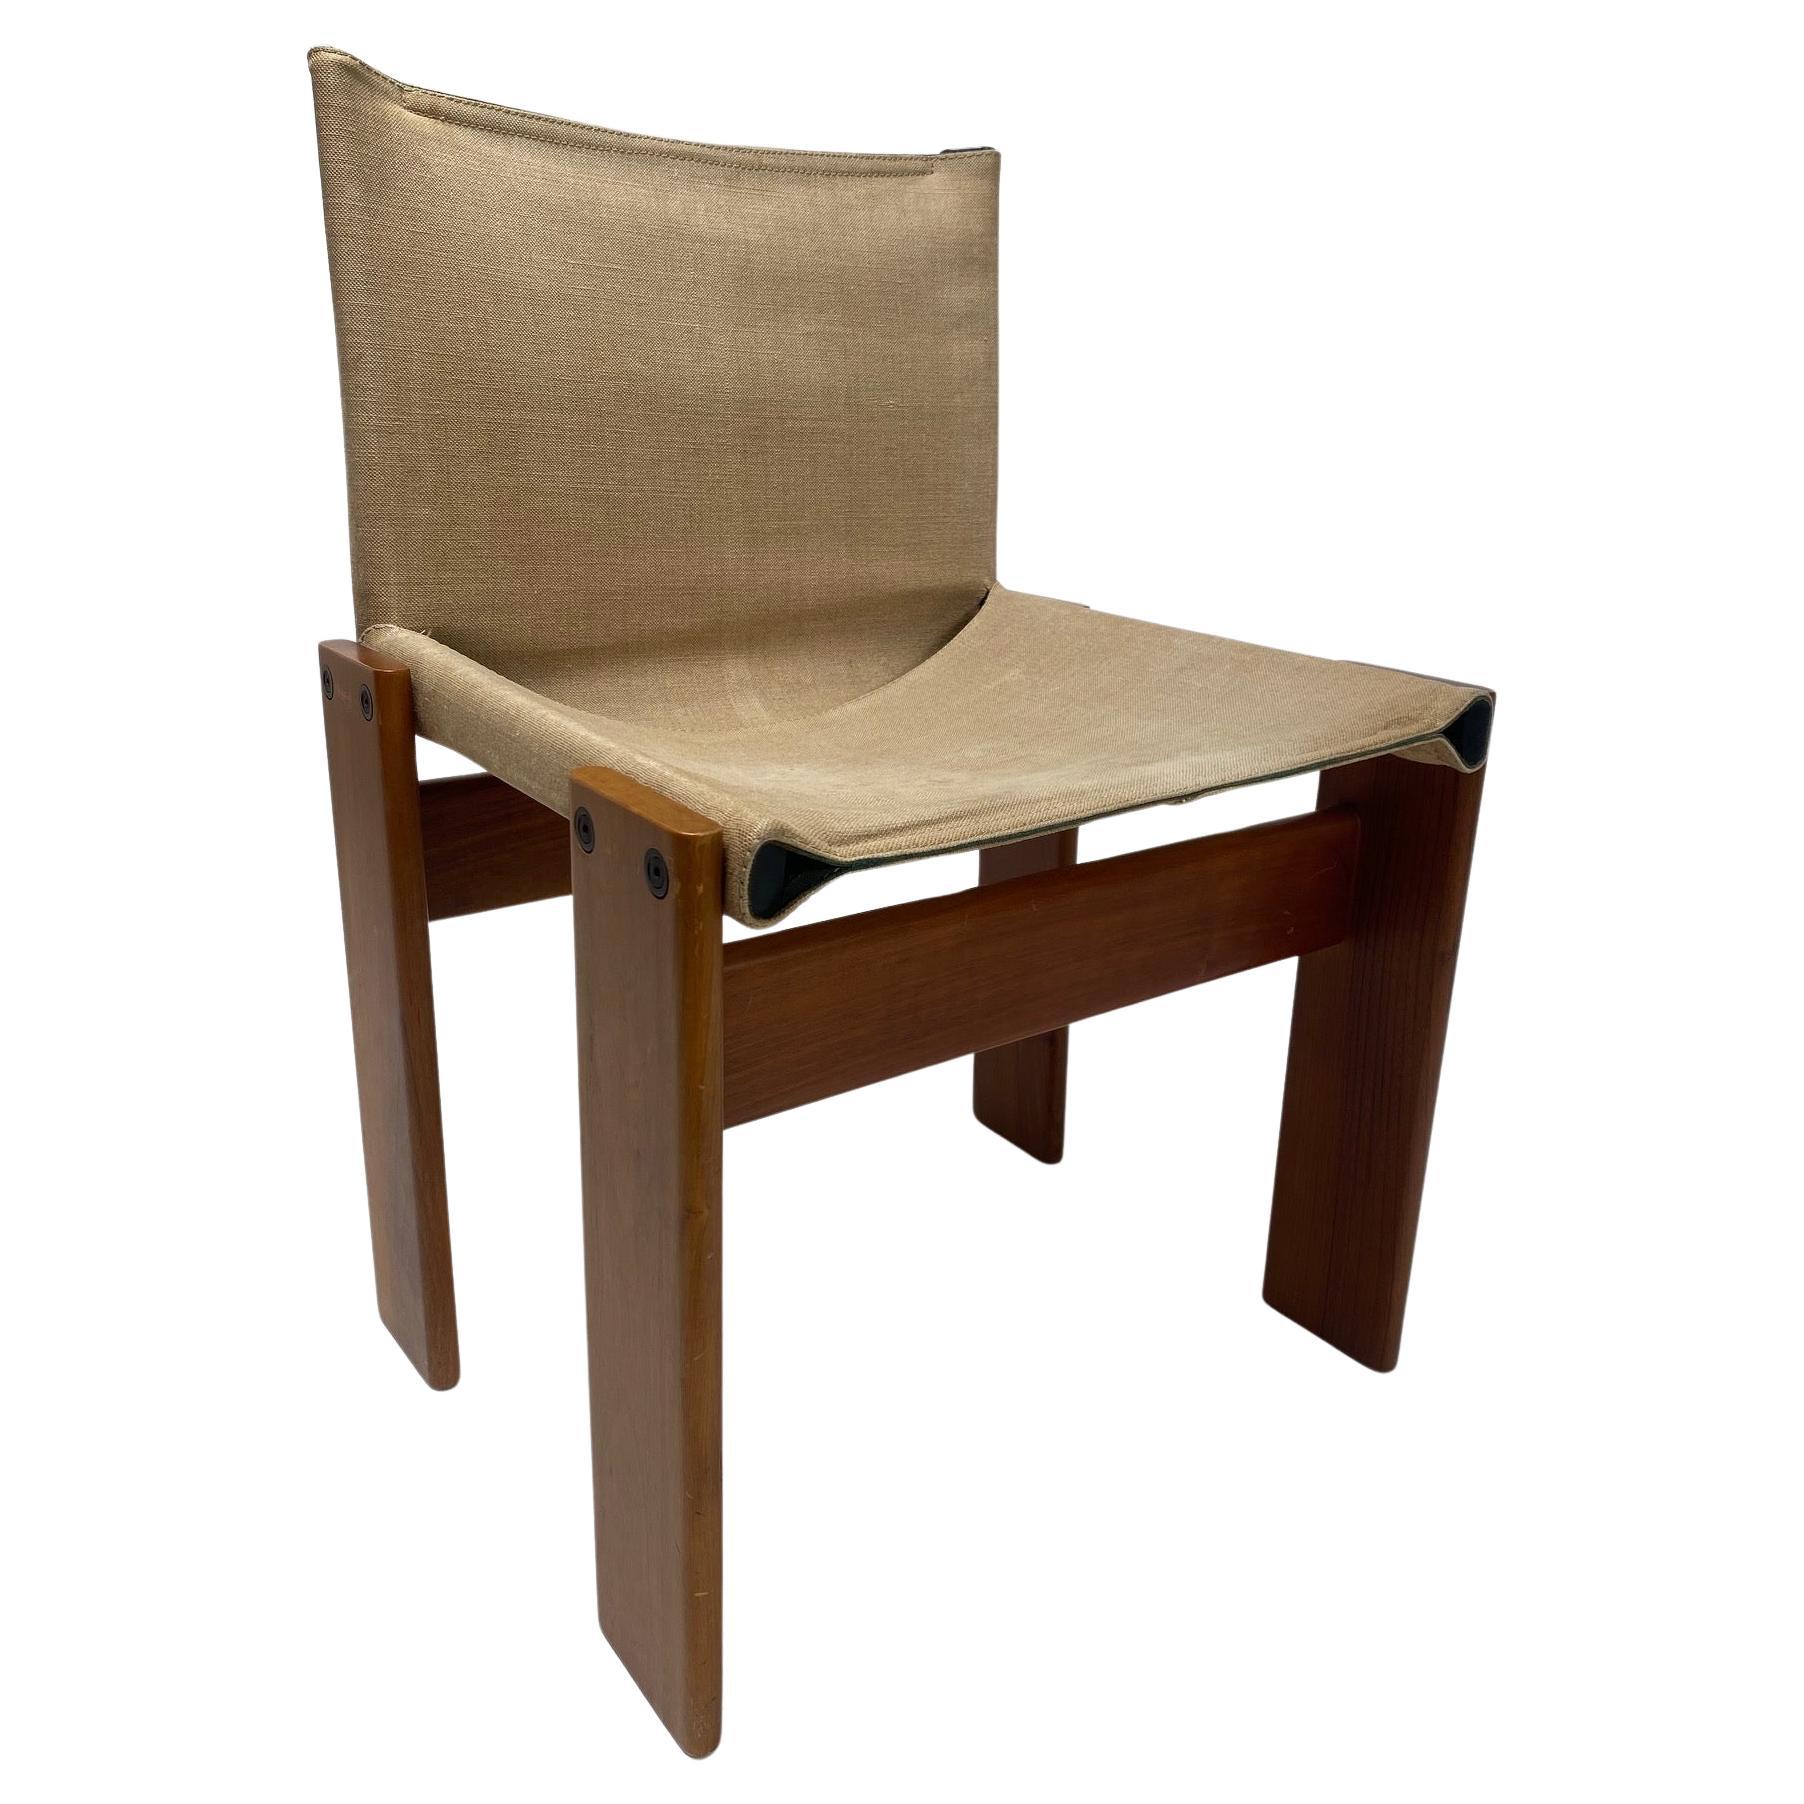 7 'Monk' Chair by Afra & Tobia Scarpa, Molteni, Italy 1974 For Sale